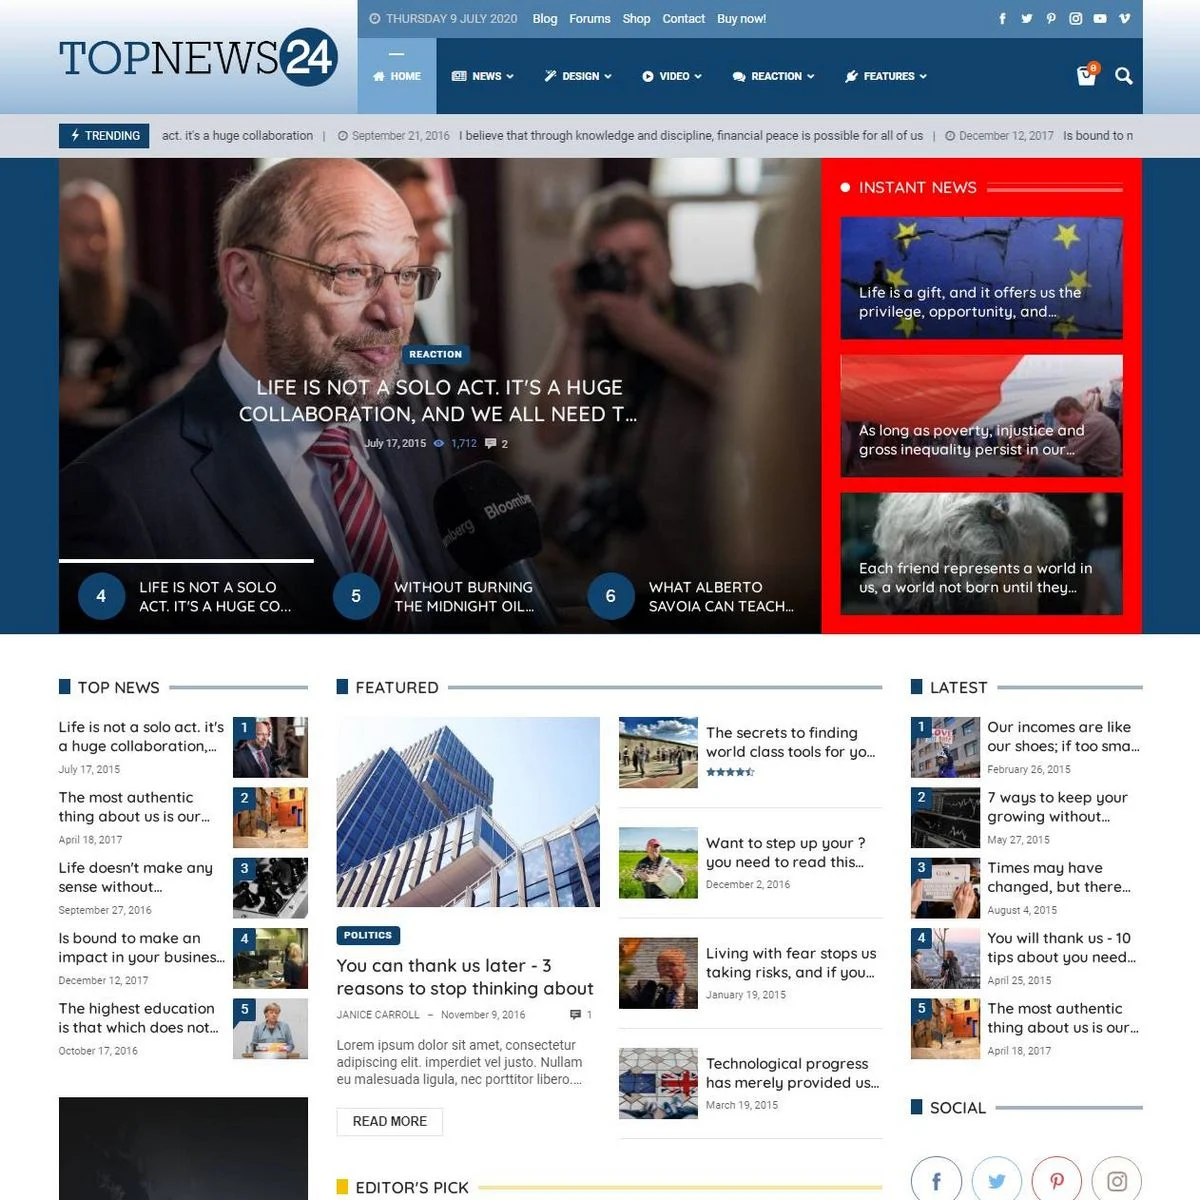 Topnews homepage with banner, featured and latest news.